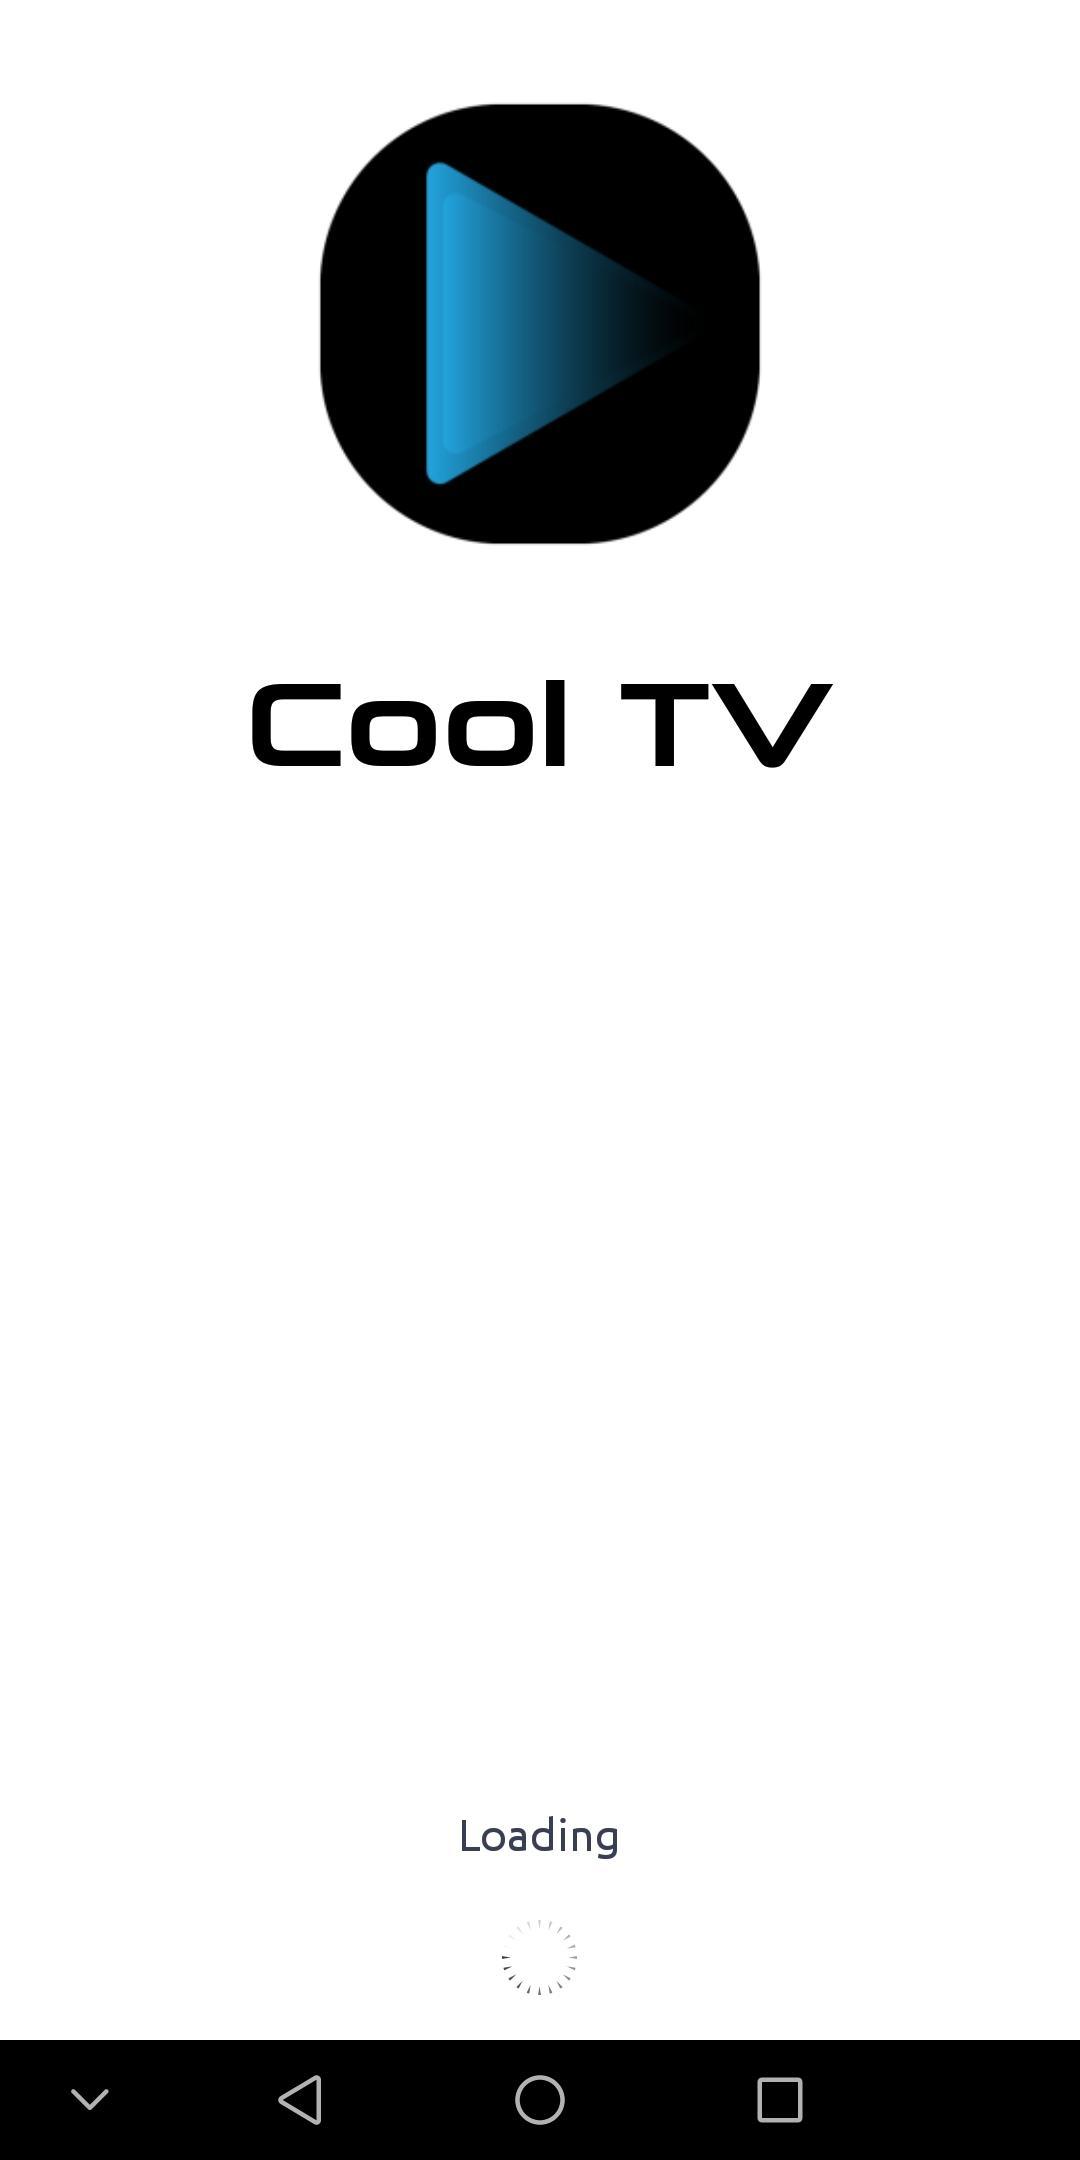 Cool Tv for Android - APK Download